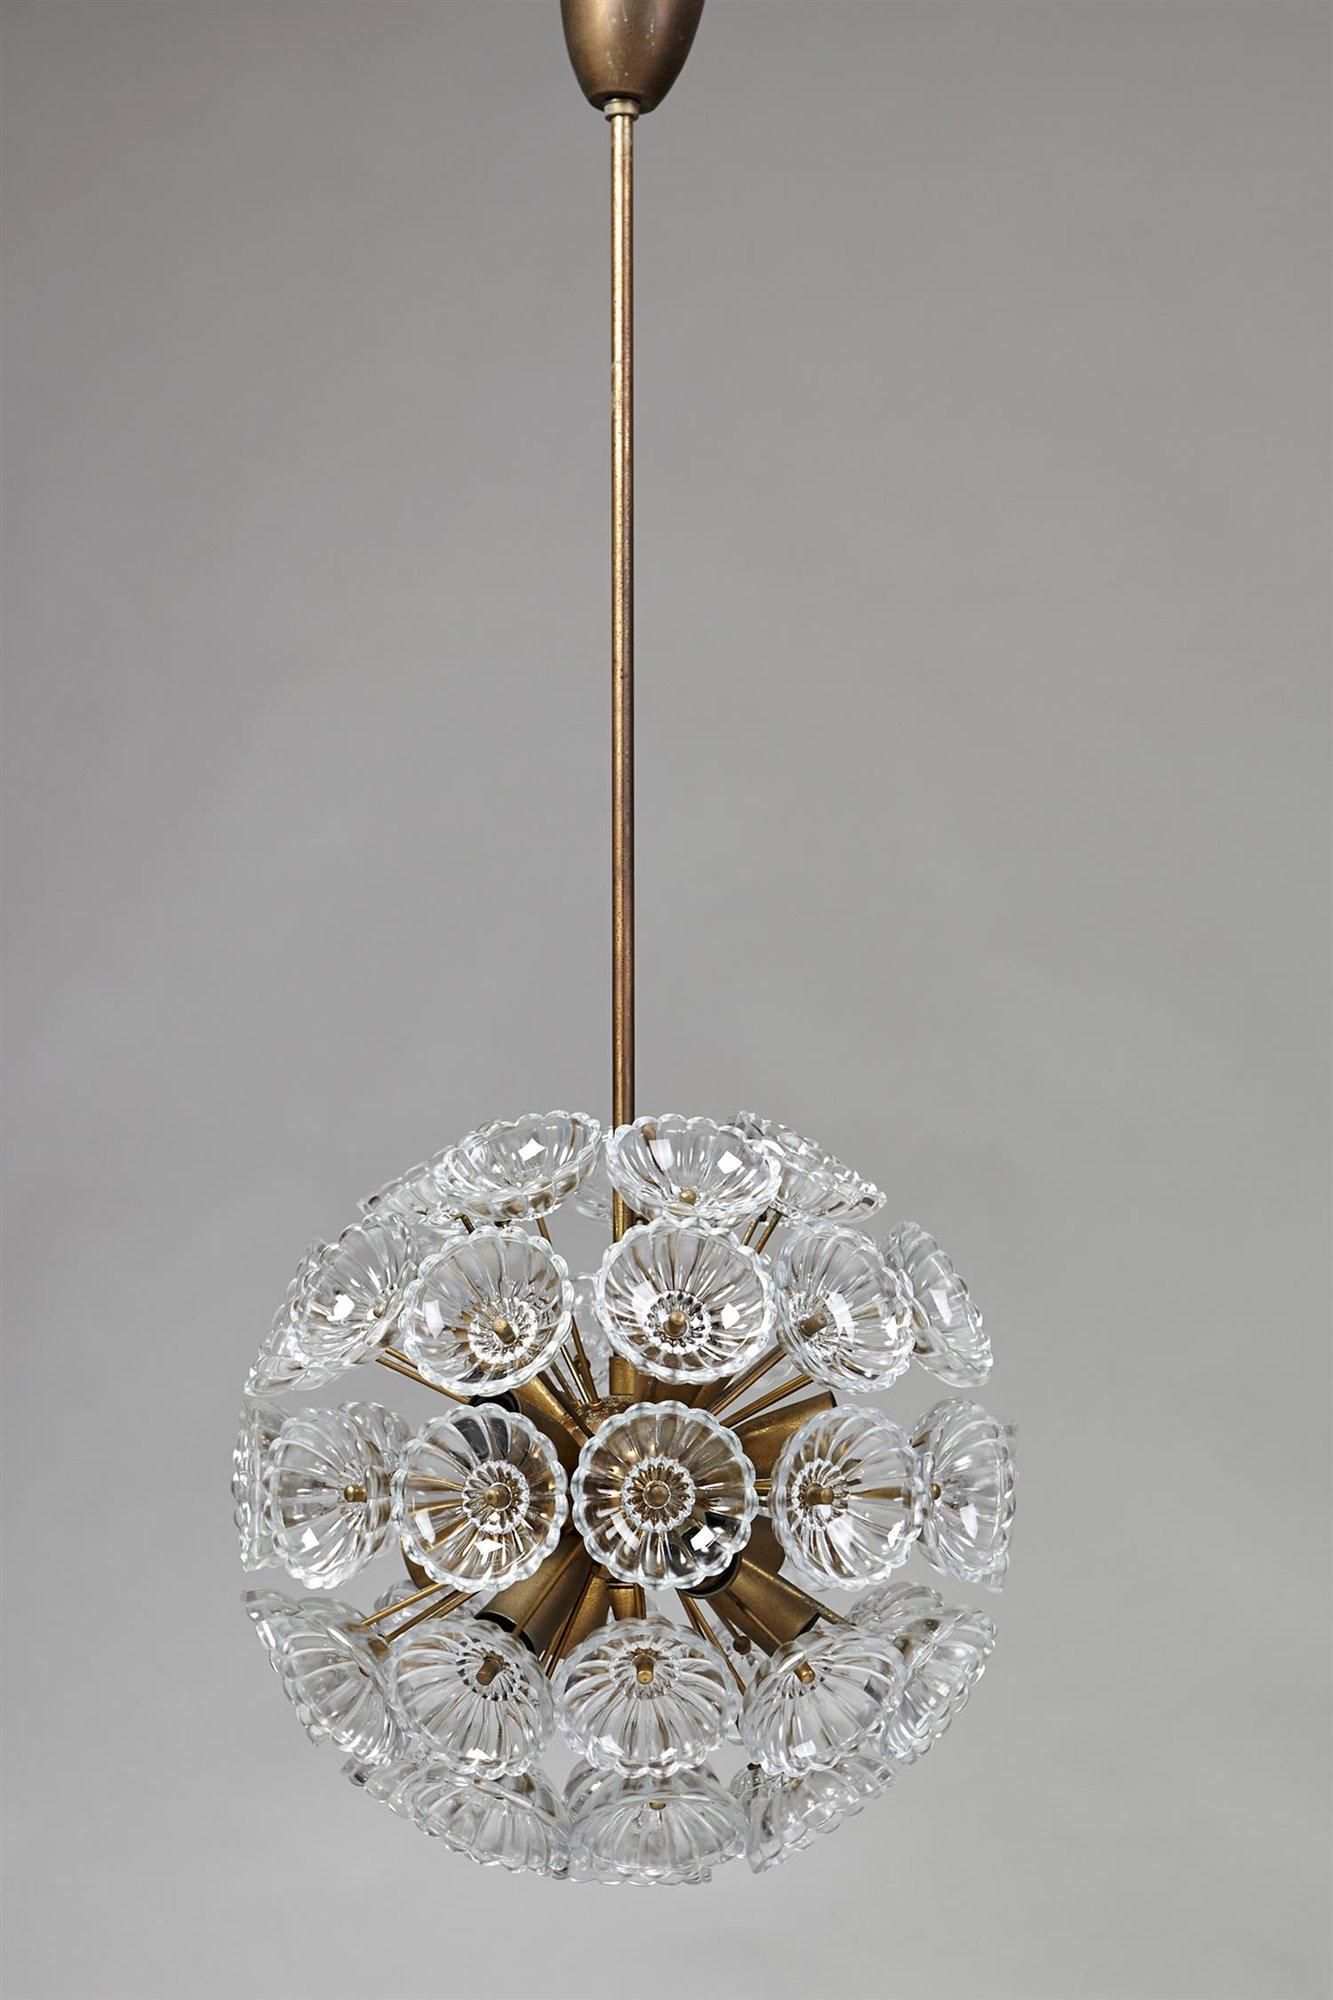 Glass and brass.

Measures: H 100 cm/ 39 1/2